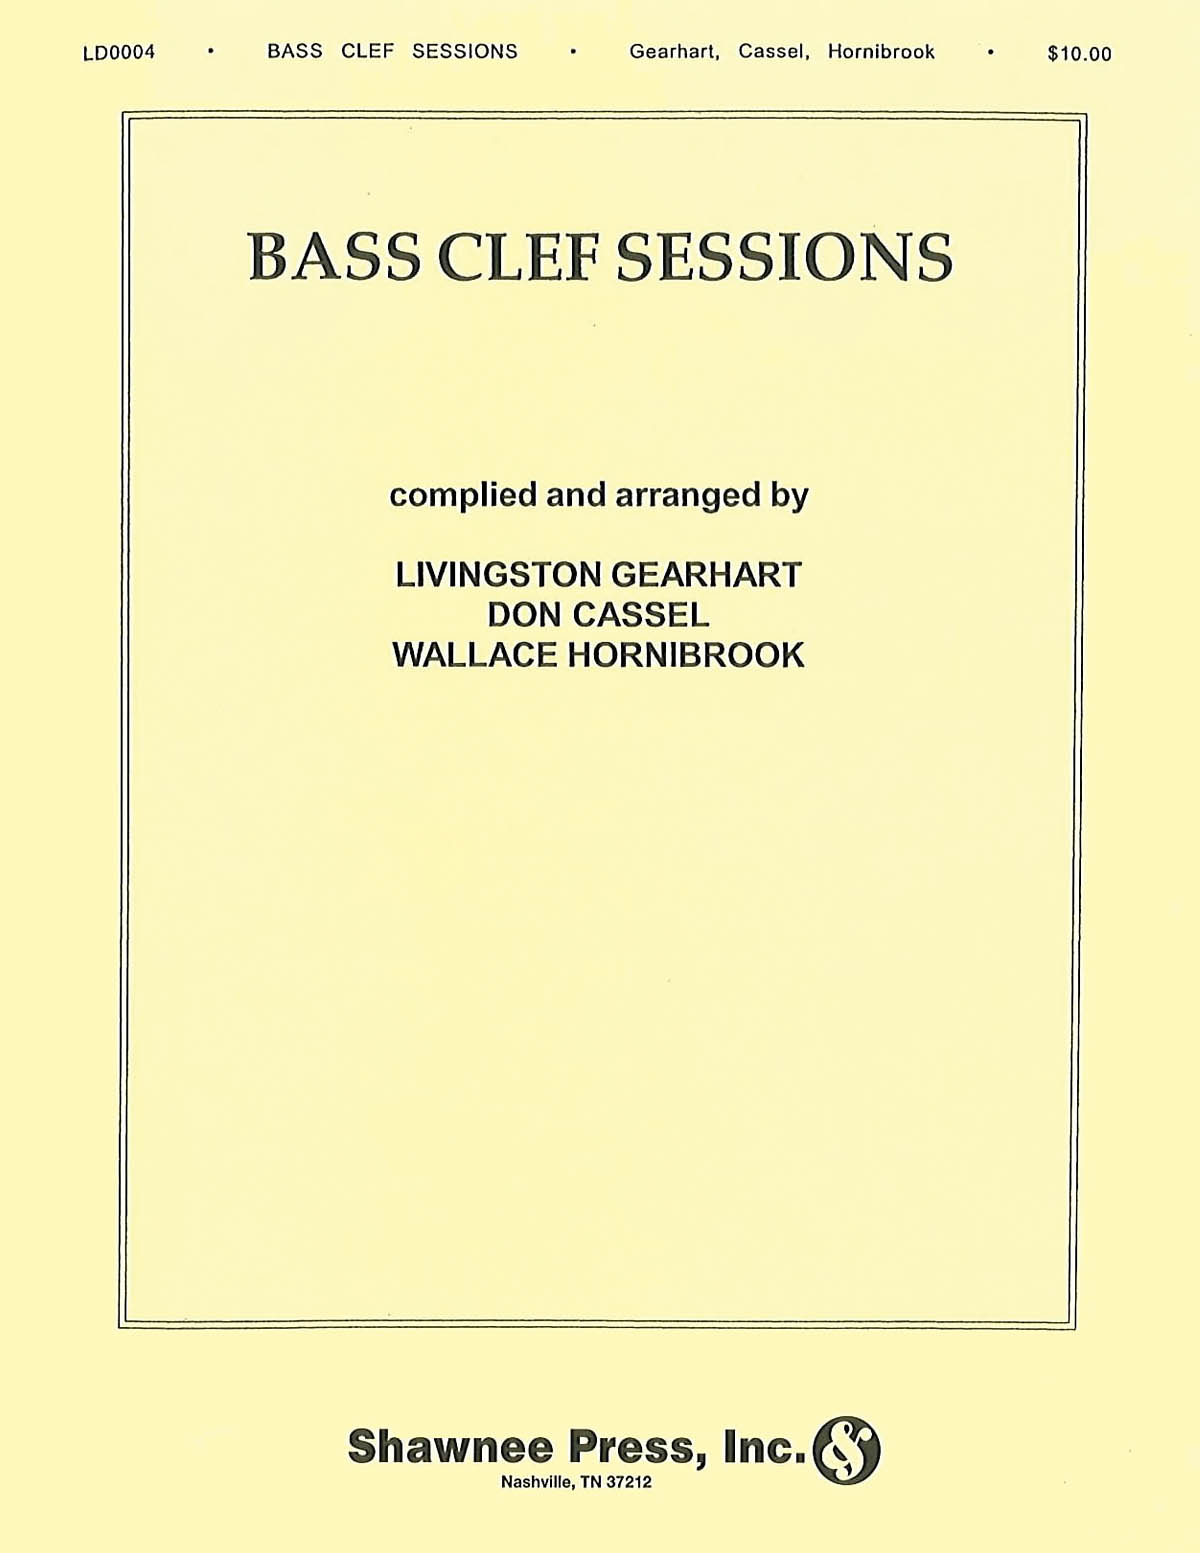 Bass Clef Sessions